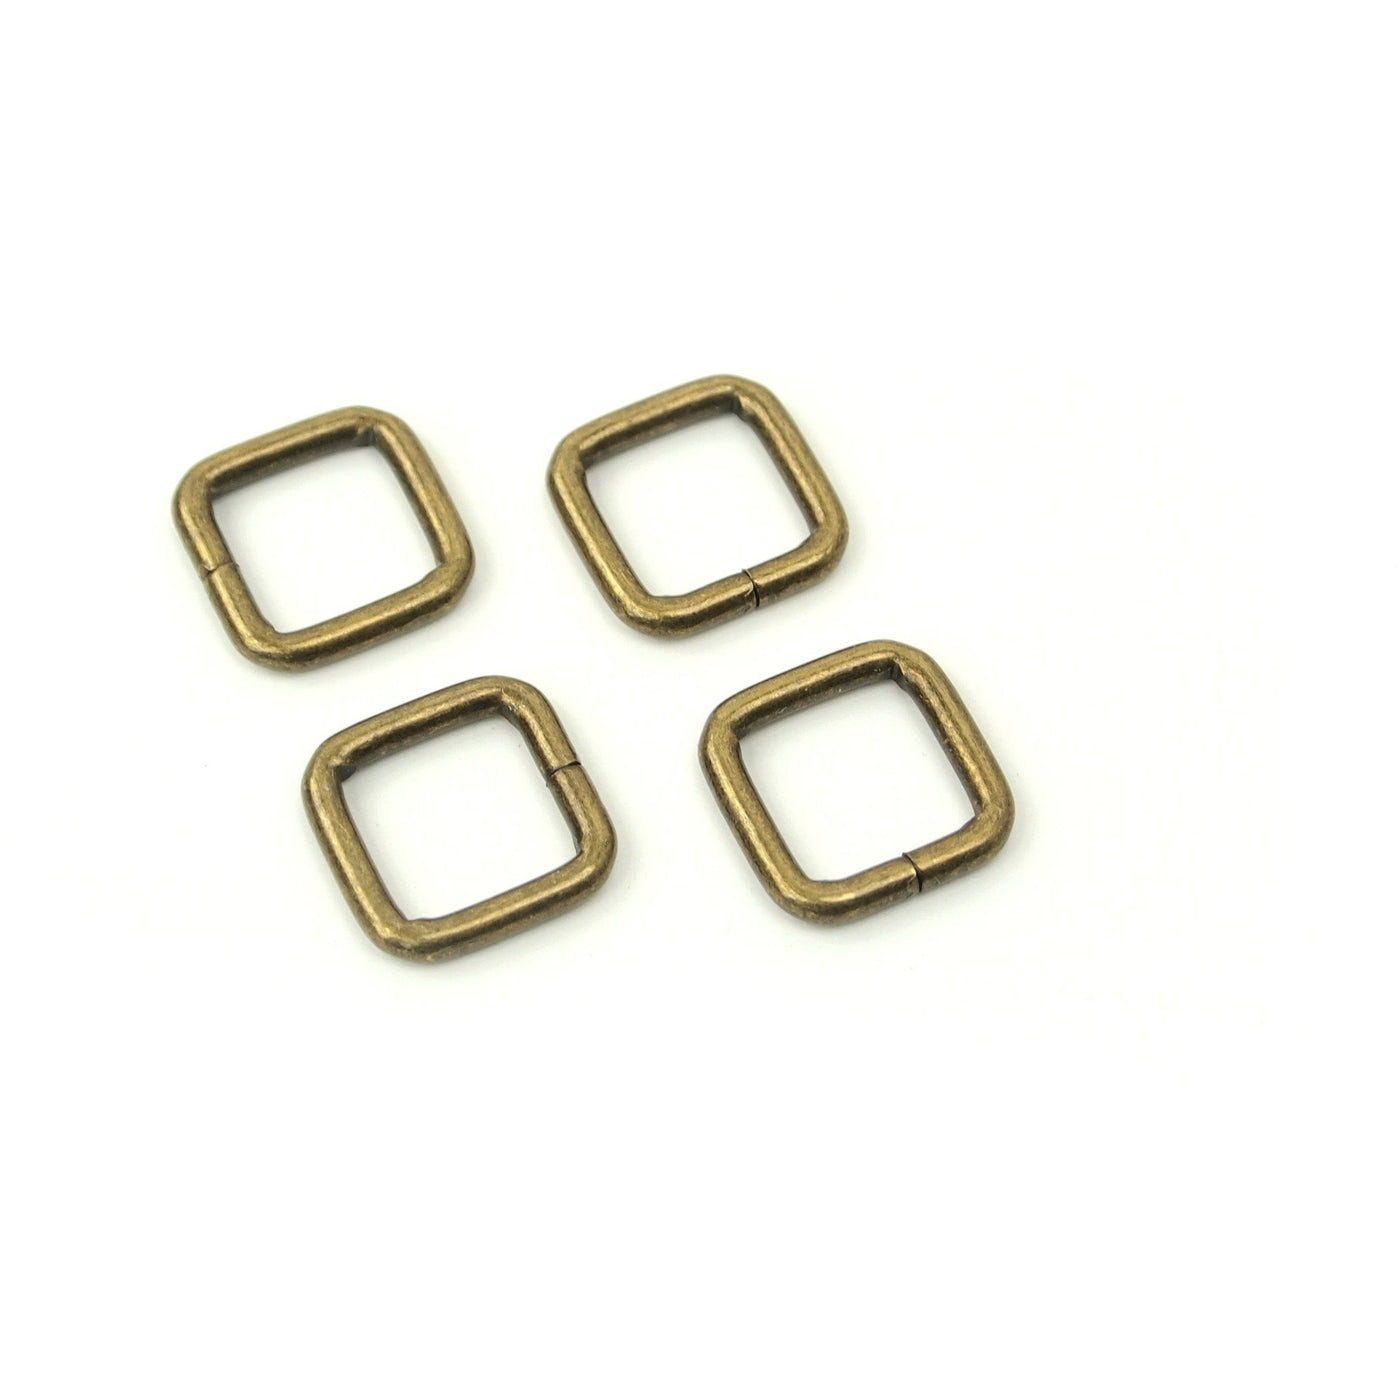 Antique 1/2" Rectangle Rings